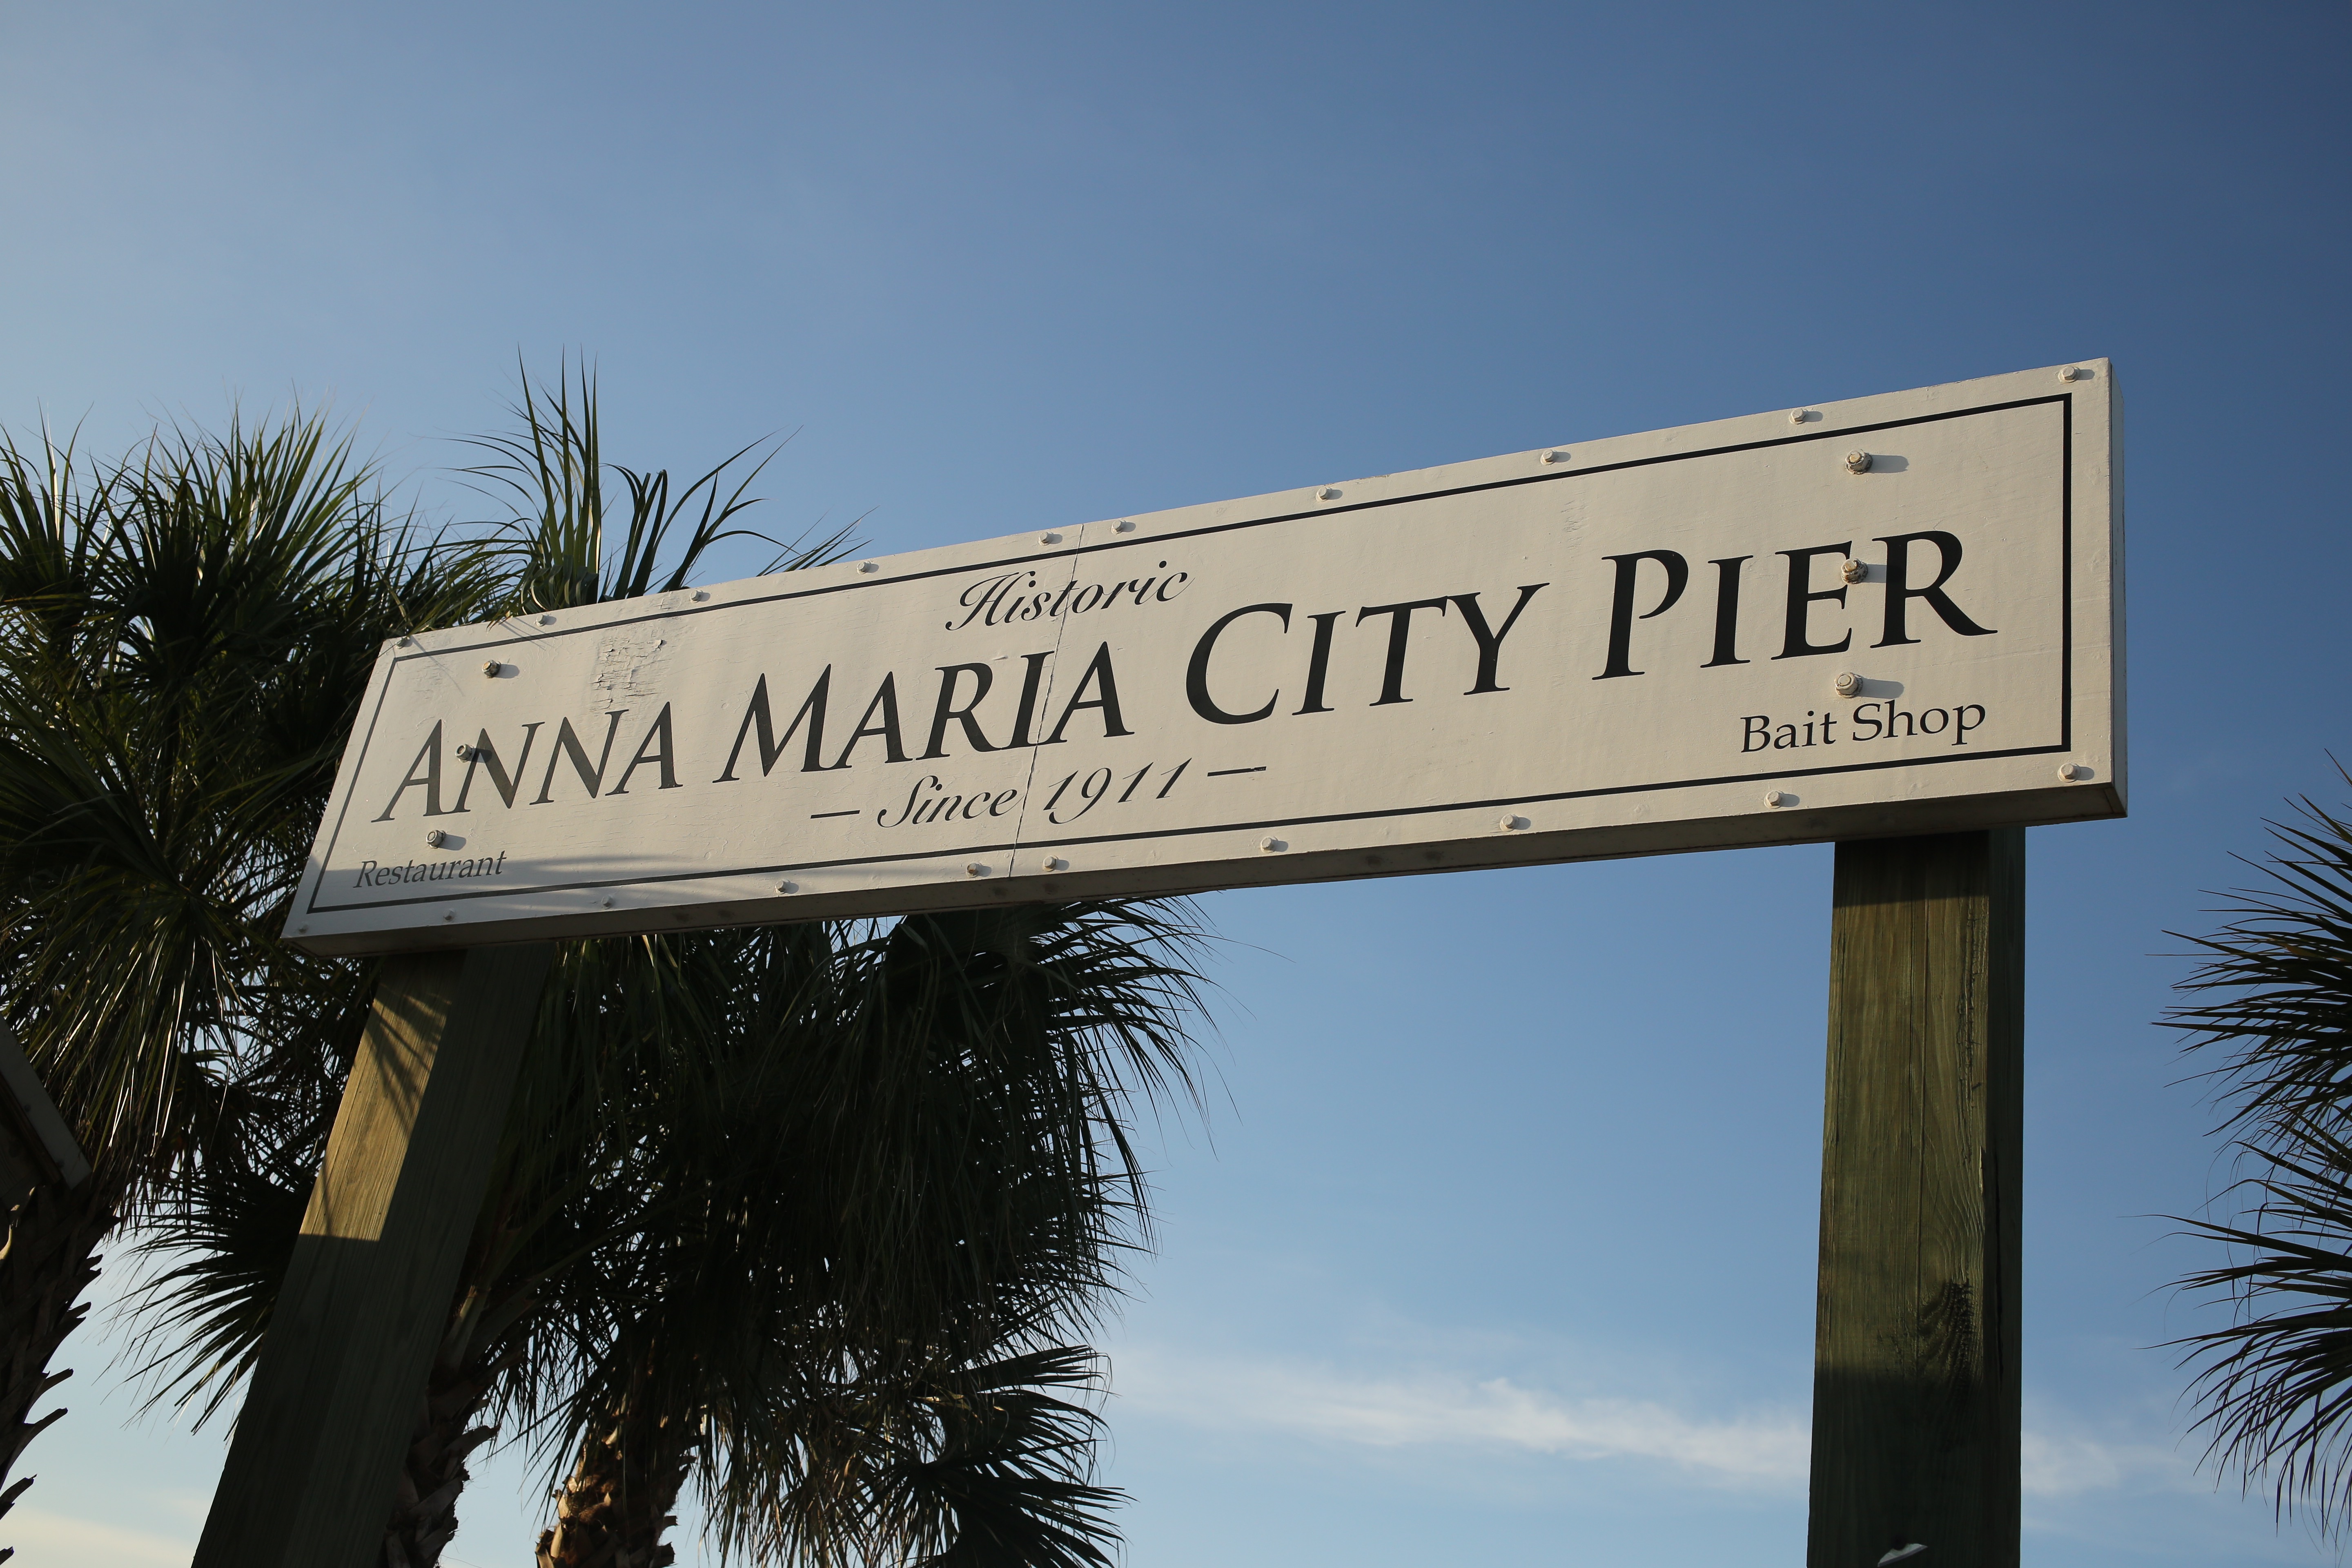 5 Resons to Visit Anna Maria Island, Florida. Where to eat, where to stay and which beaches to visit. #florida #beaches #annamariaisland